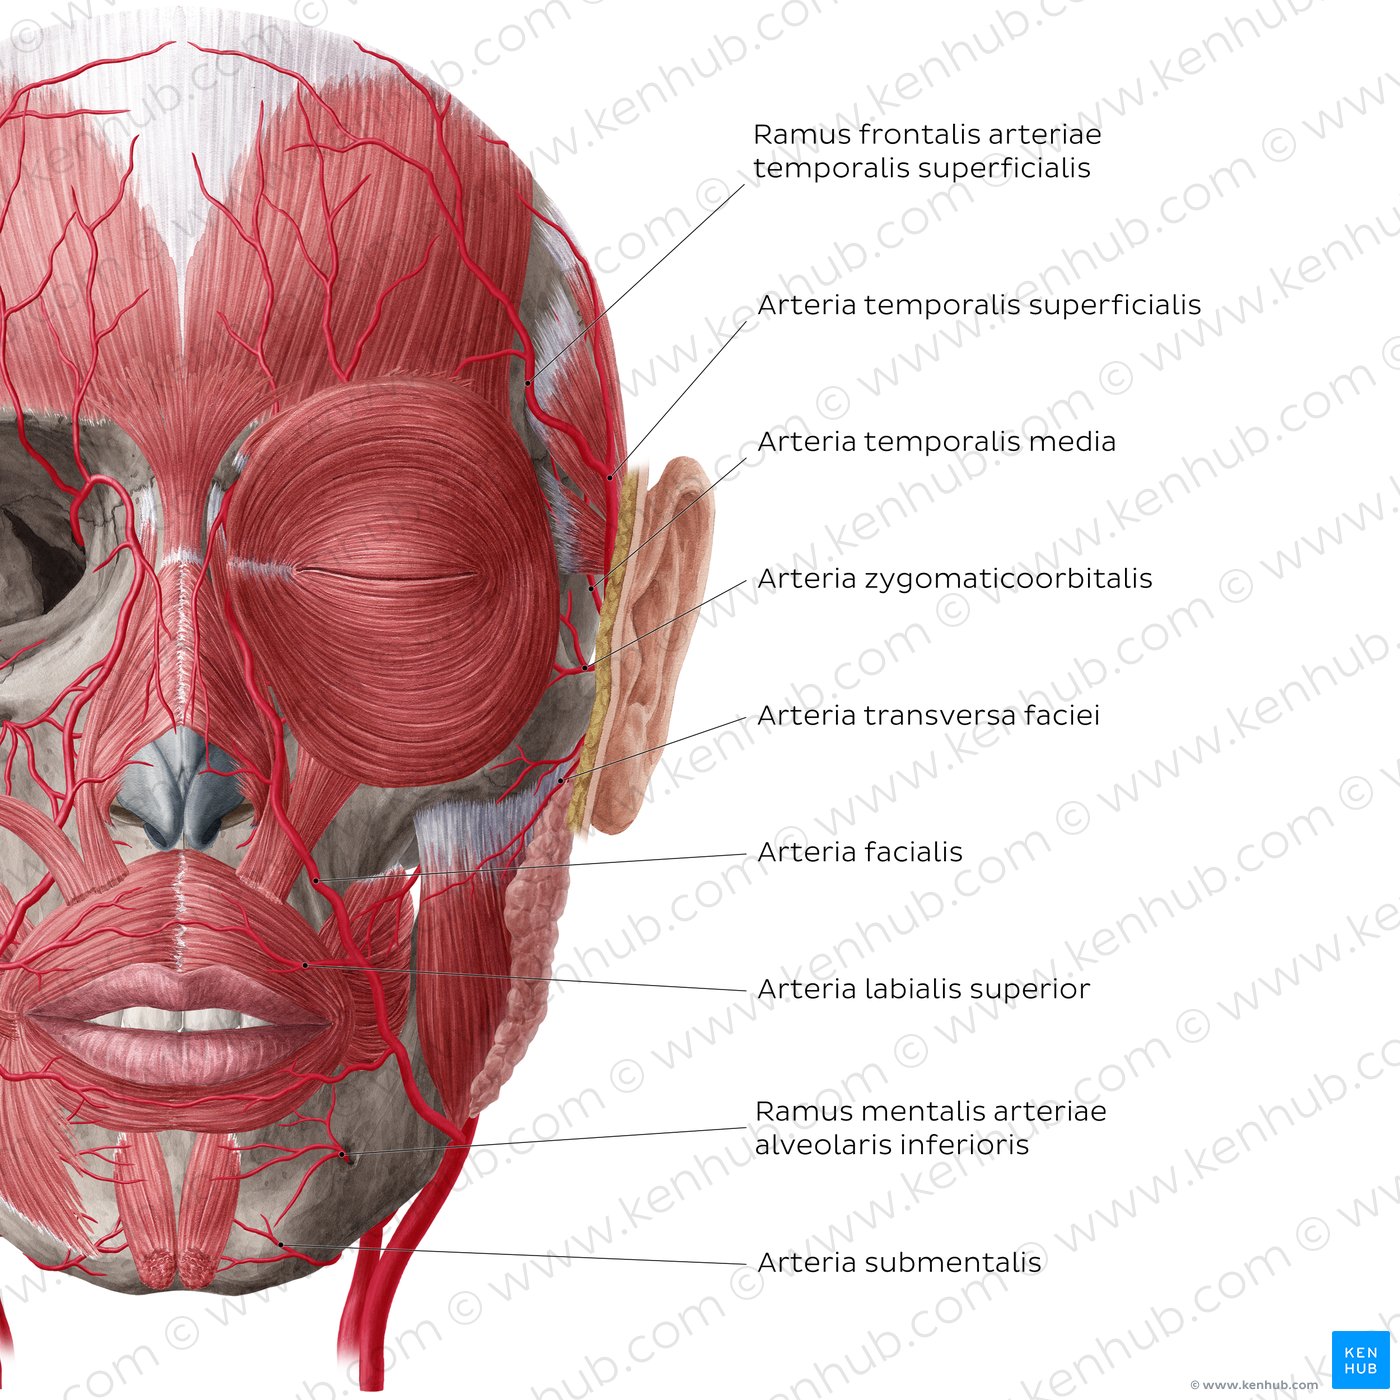 Arteries of face and scalp (Anterior view: superficial)